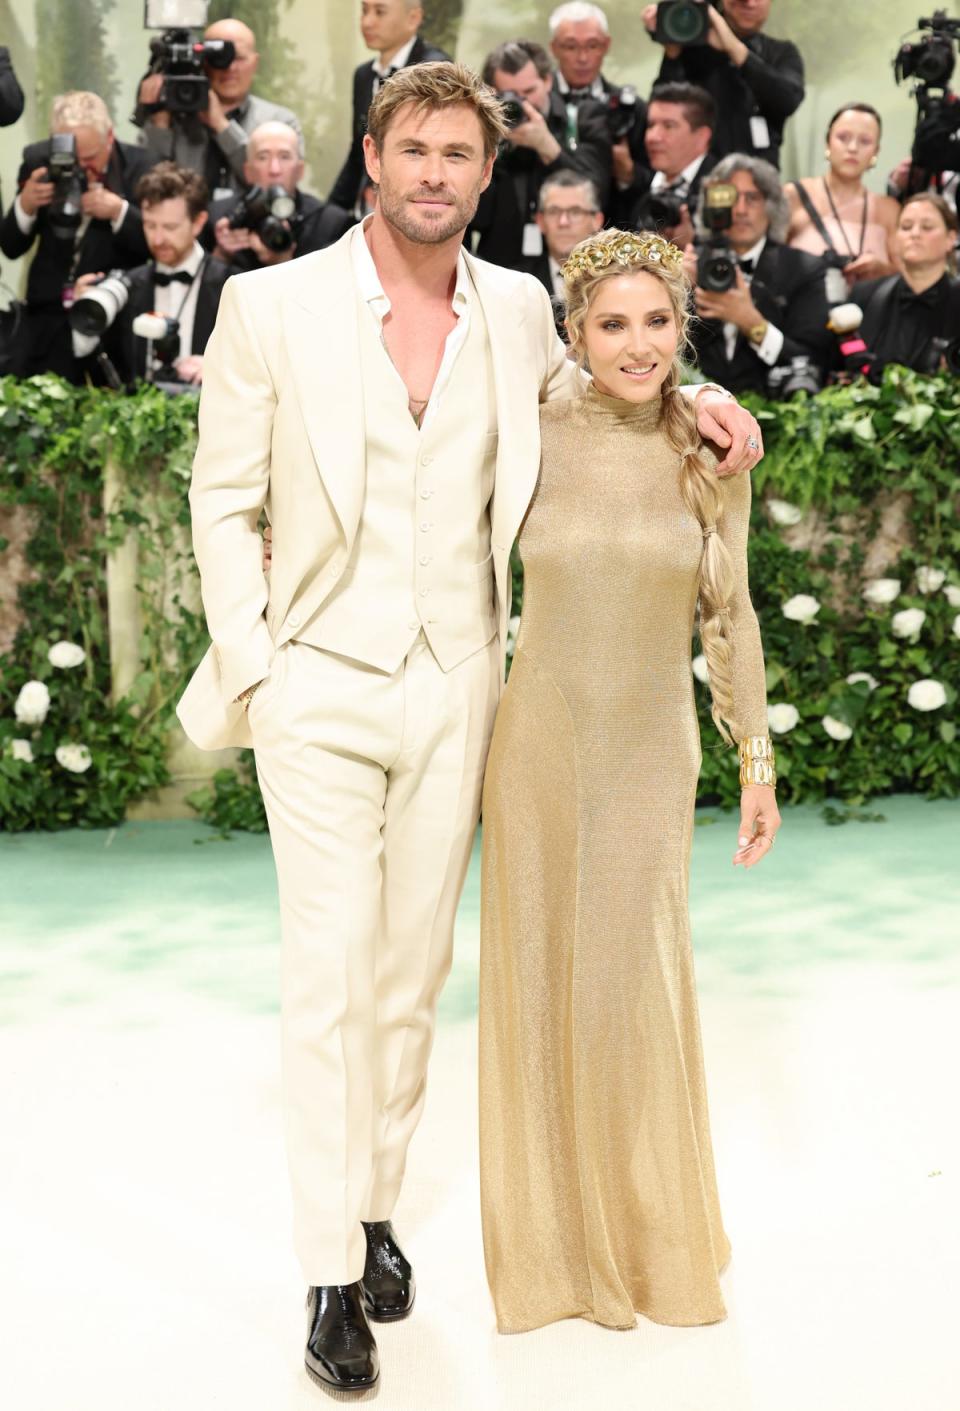 Chris Hemsworth and Elsa Pataky, both in Tom Ford (Getty Images)